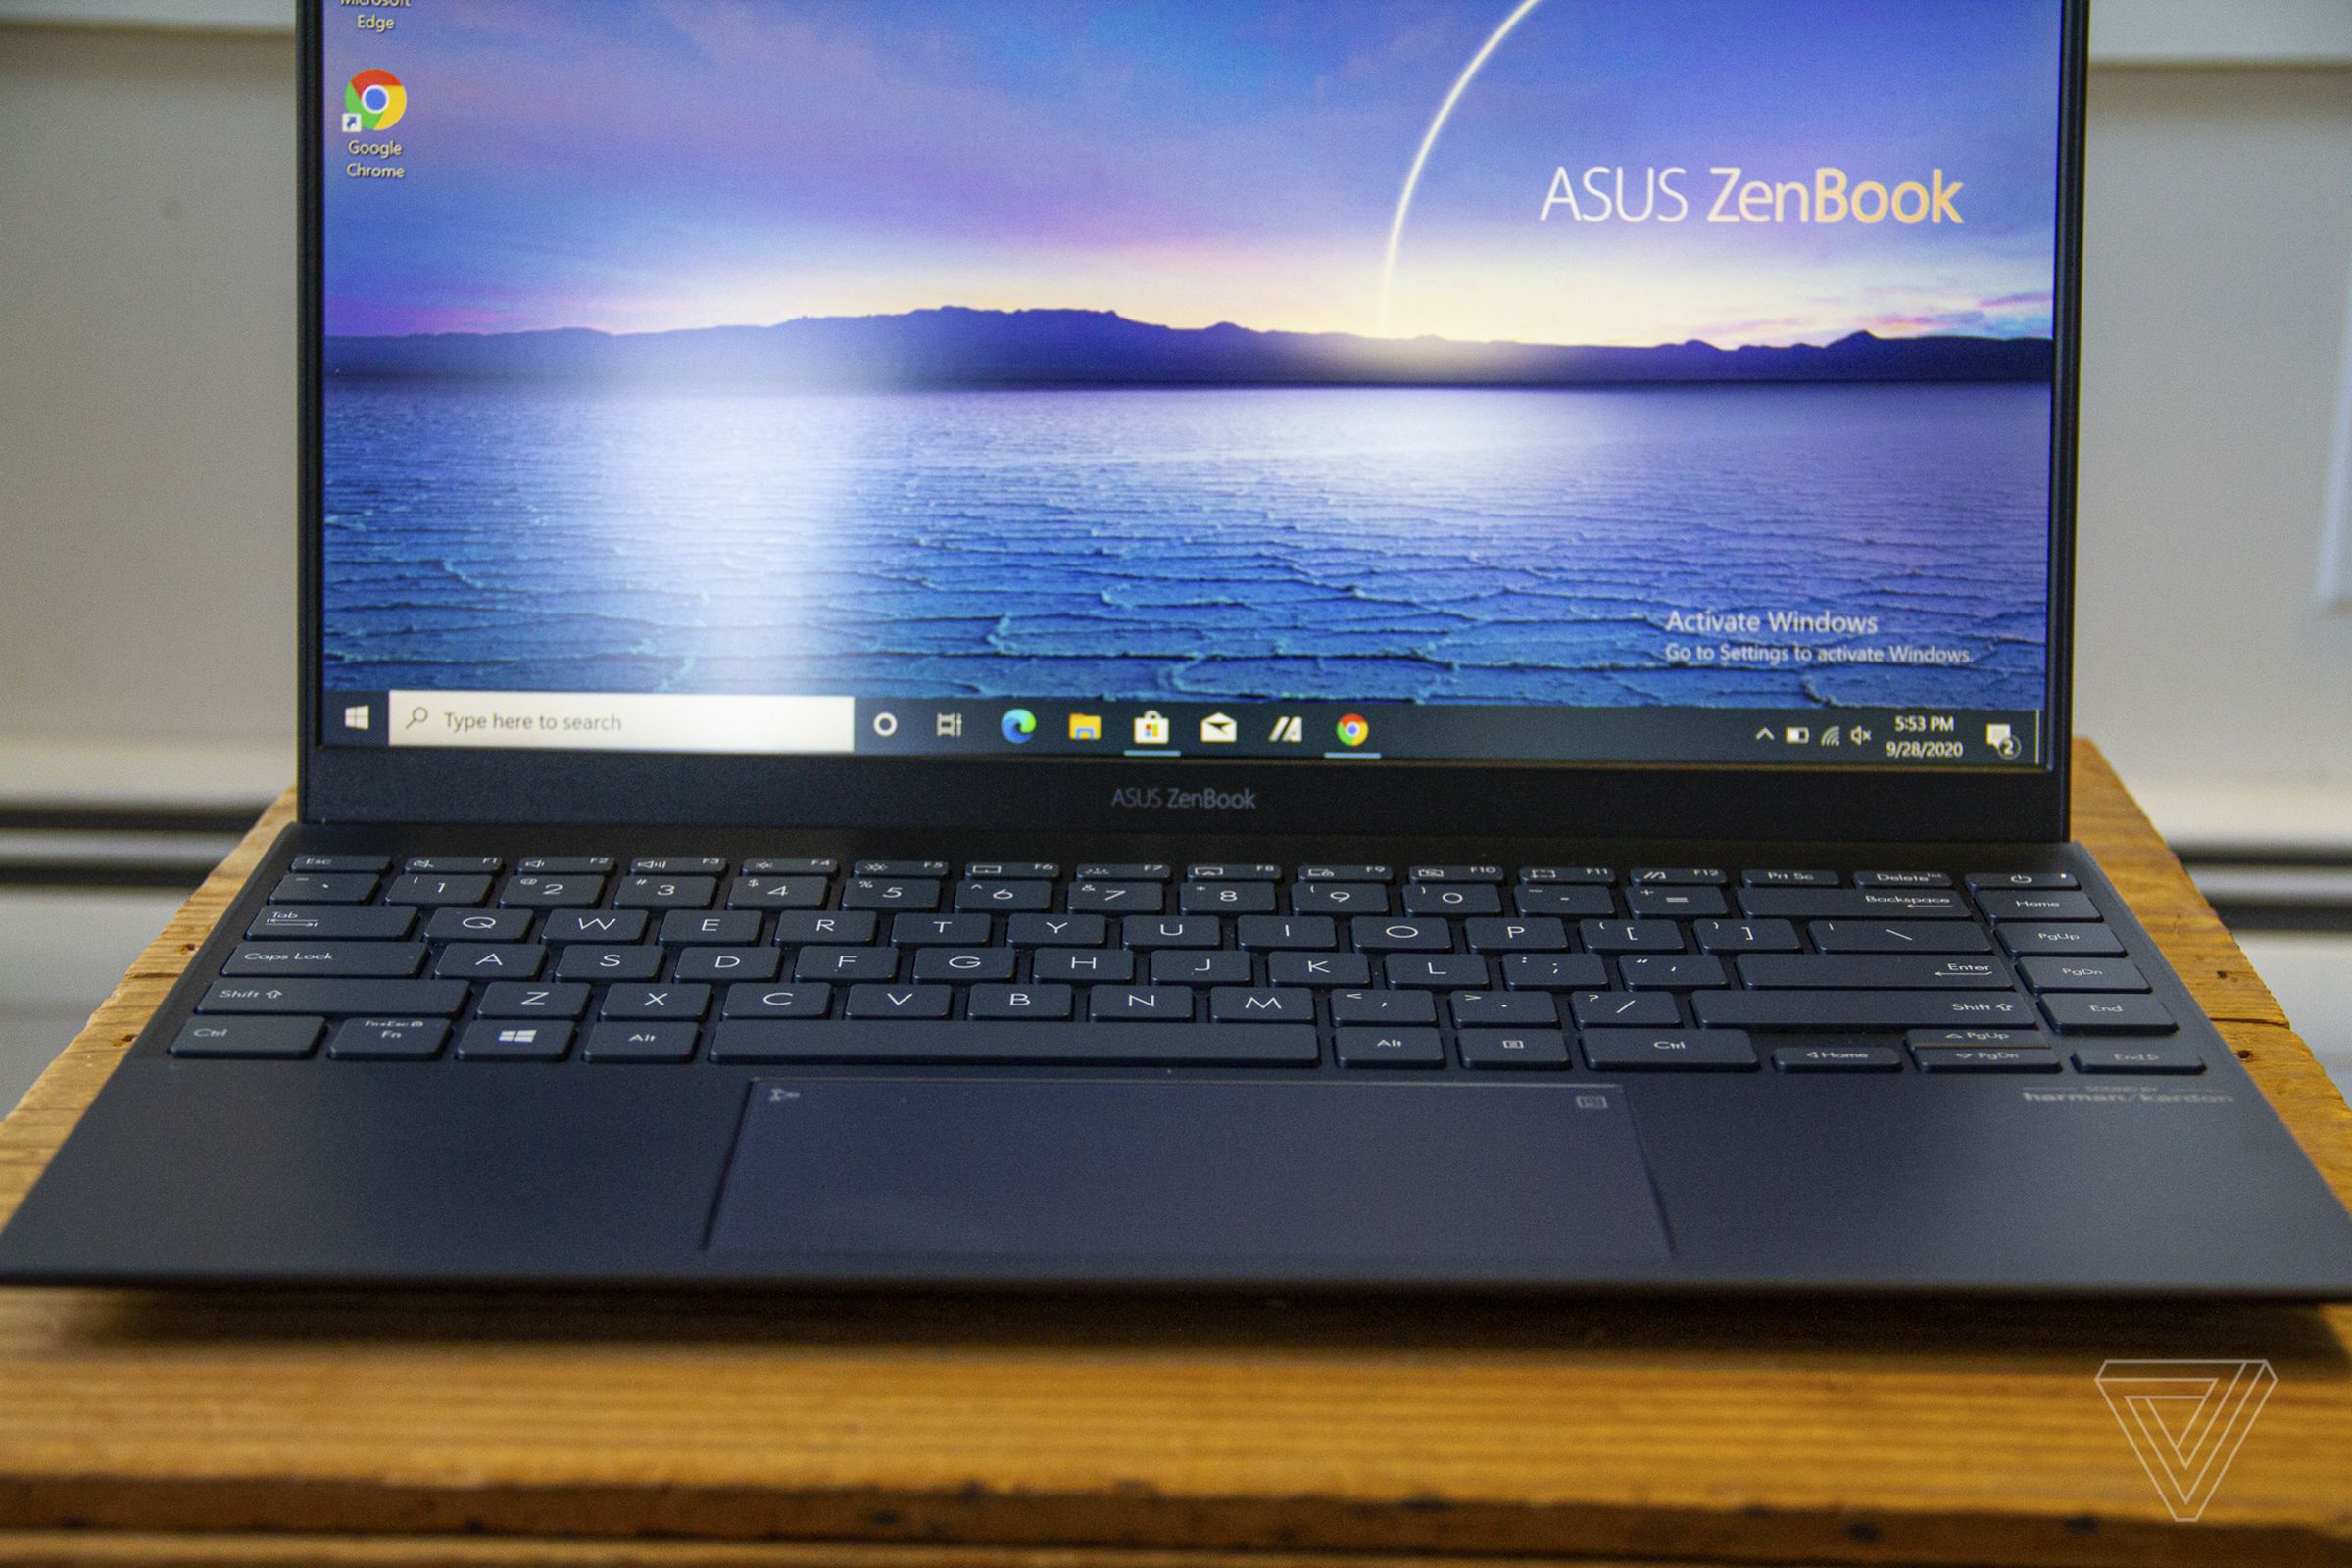 The Asus logo on the bottom bezel of the Asus Zenbook 14.